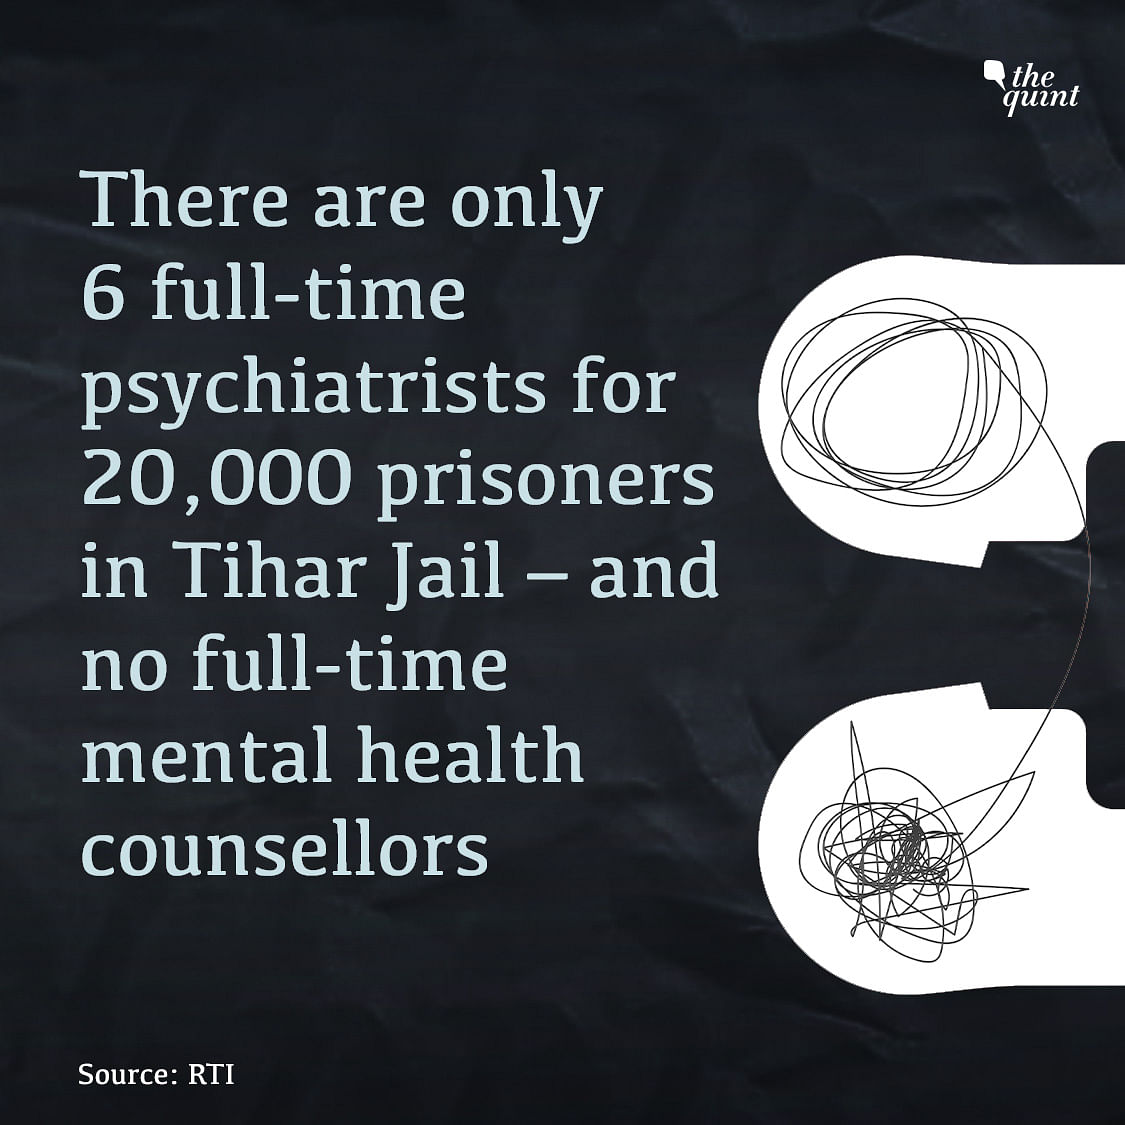 We interviewed 18 inmates to understand how Tihar Jail is not only confining the body, but also punishing the soul.